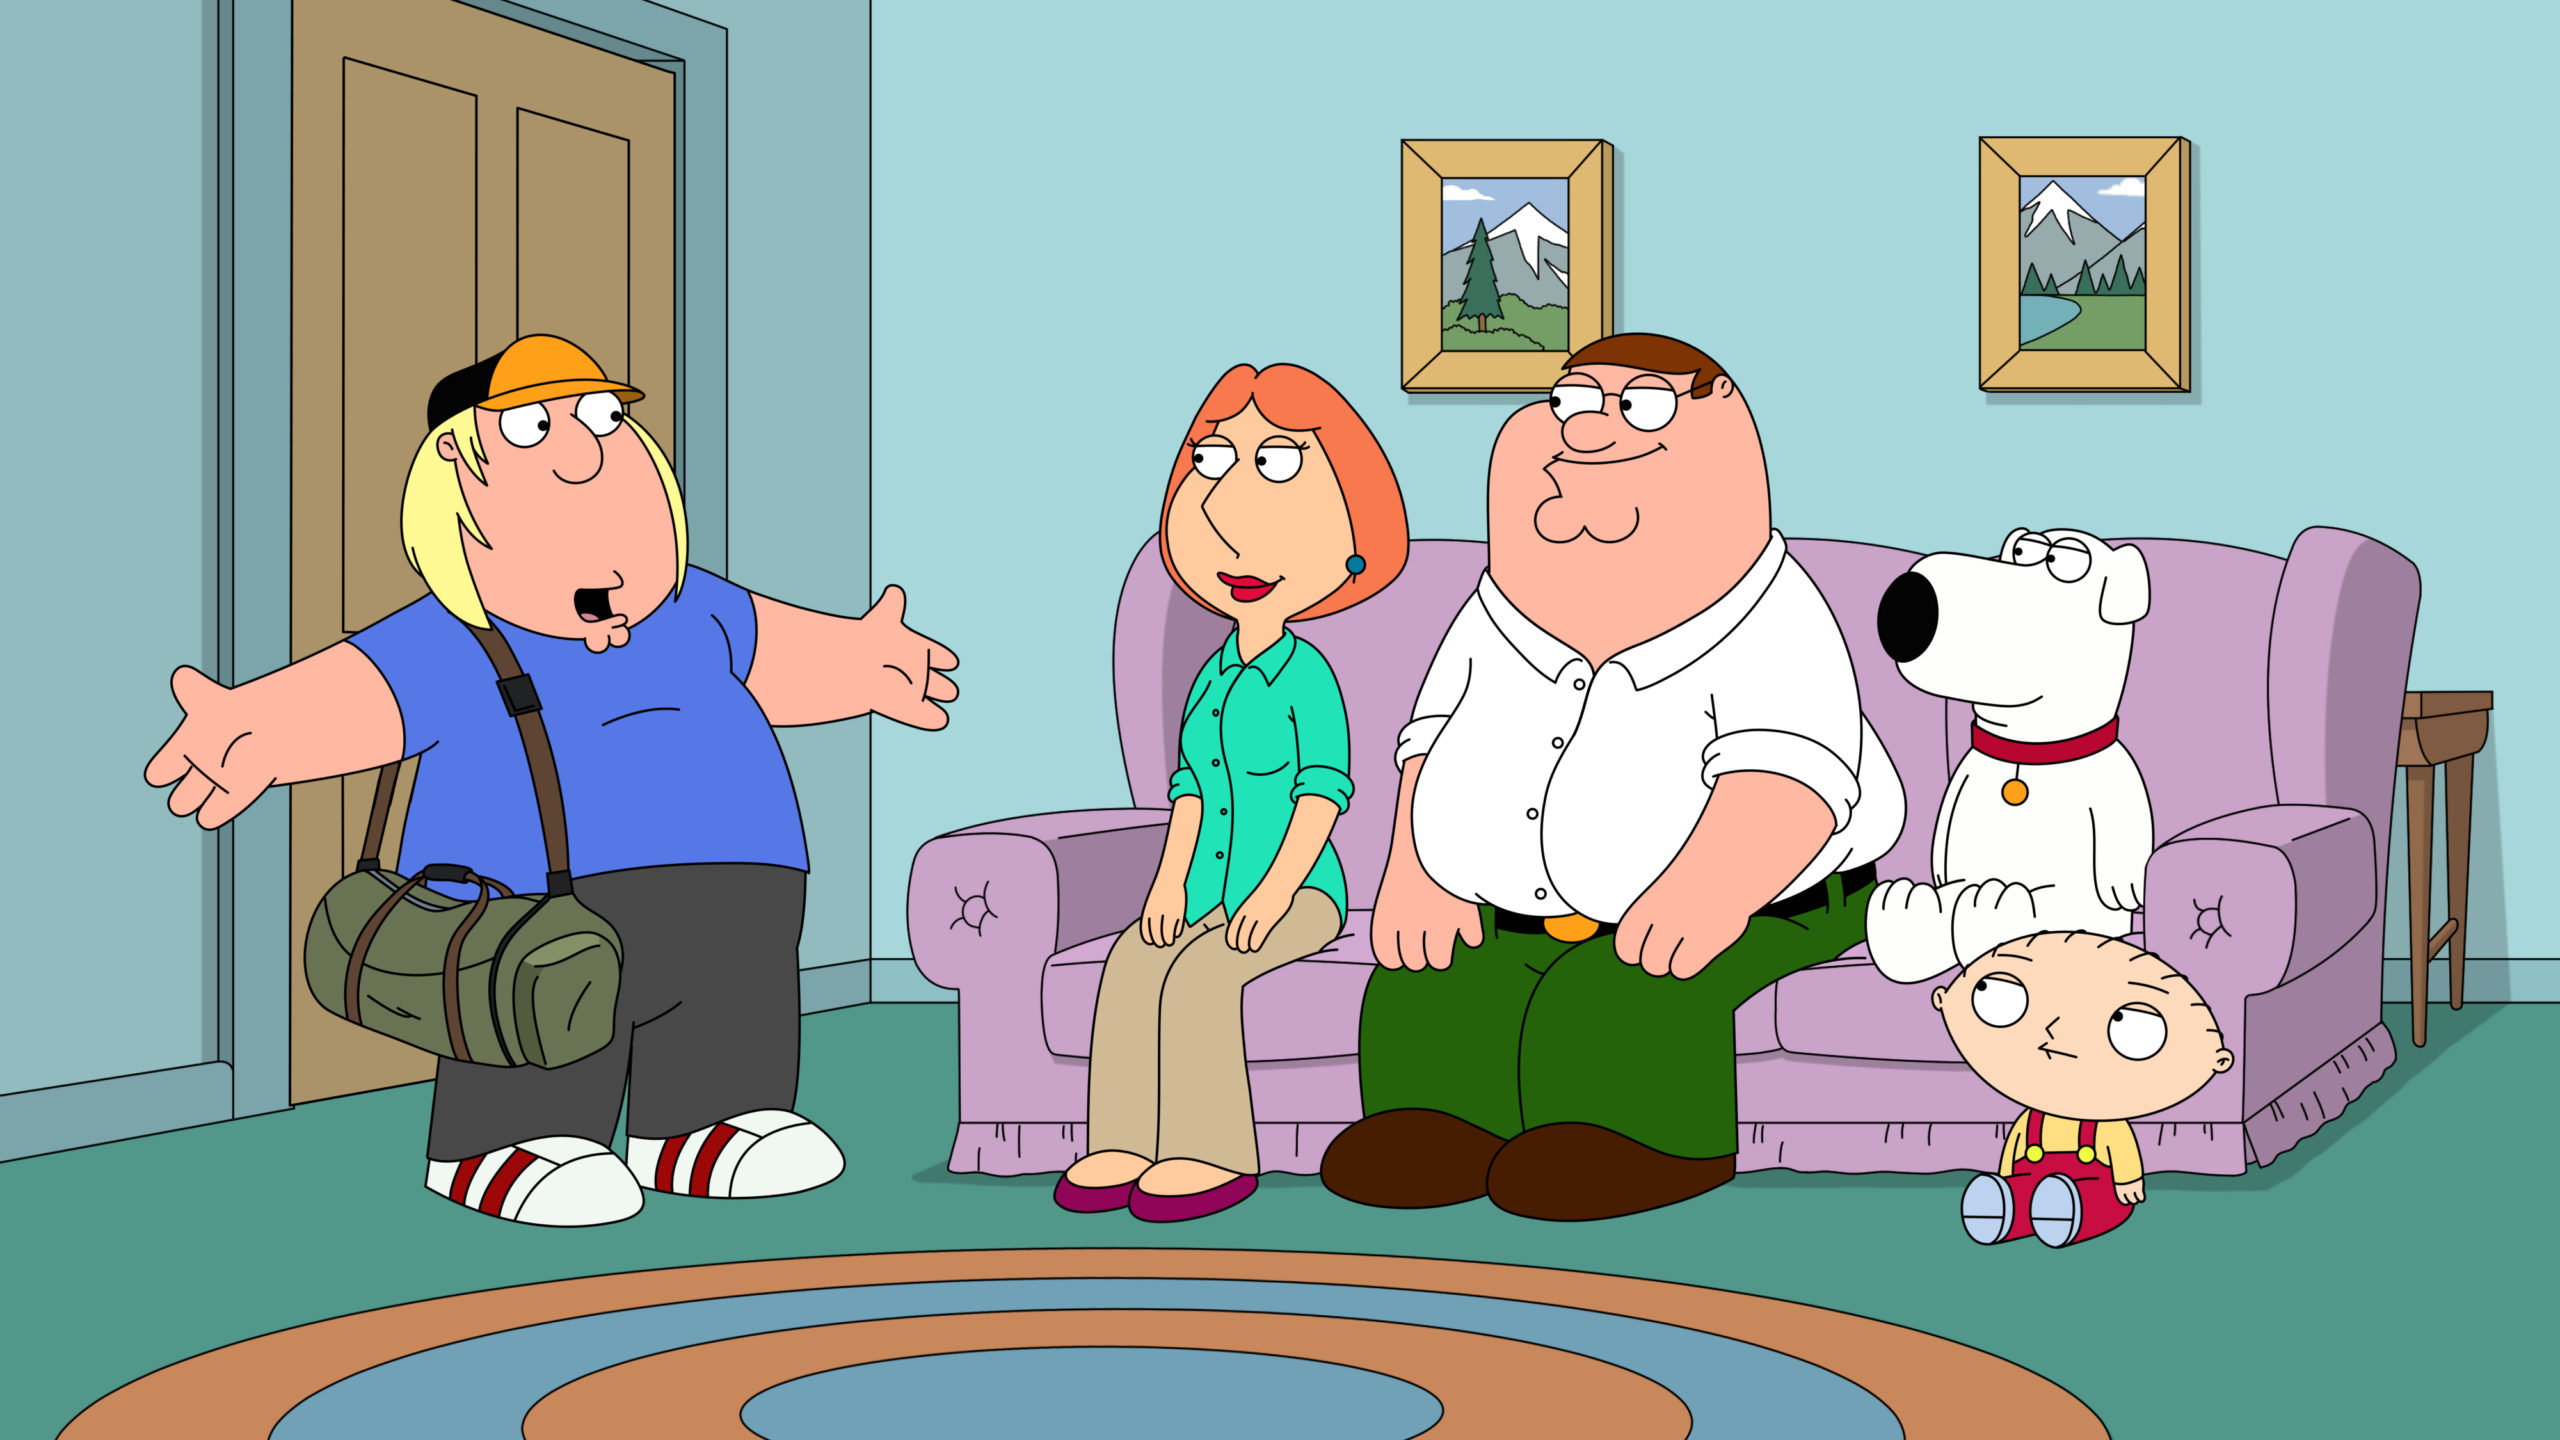 Just started watching Family Guy this Week and I love it, but I Heard that  it's going downhill in the later seasons. What's your opinion on that? : r/ familyguy